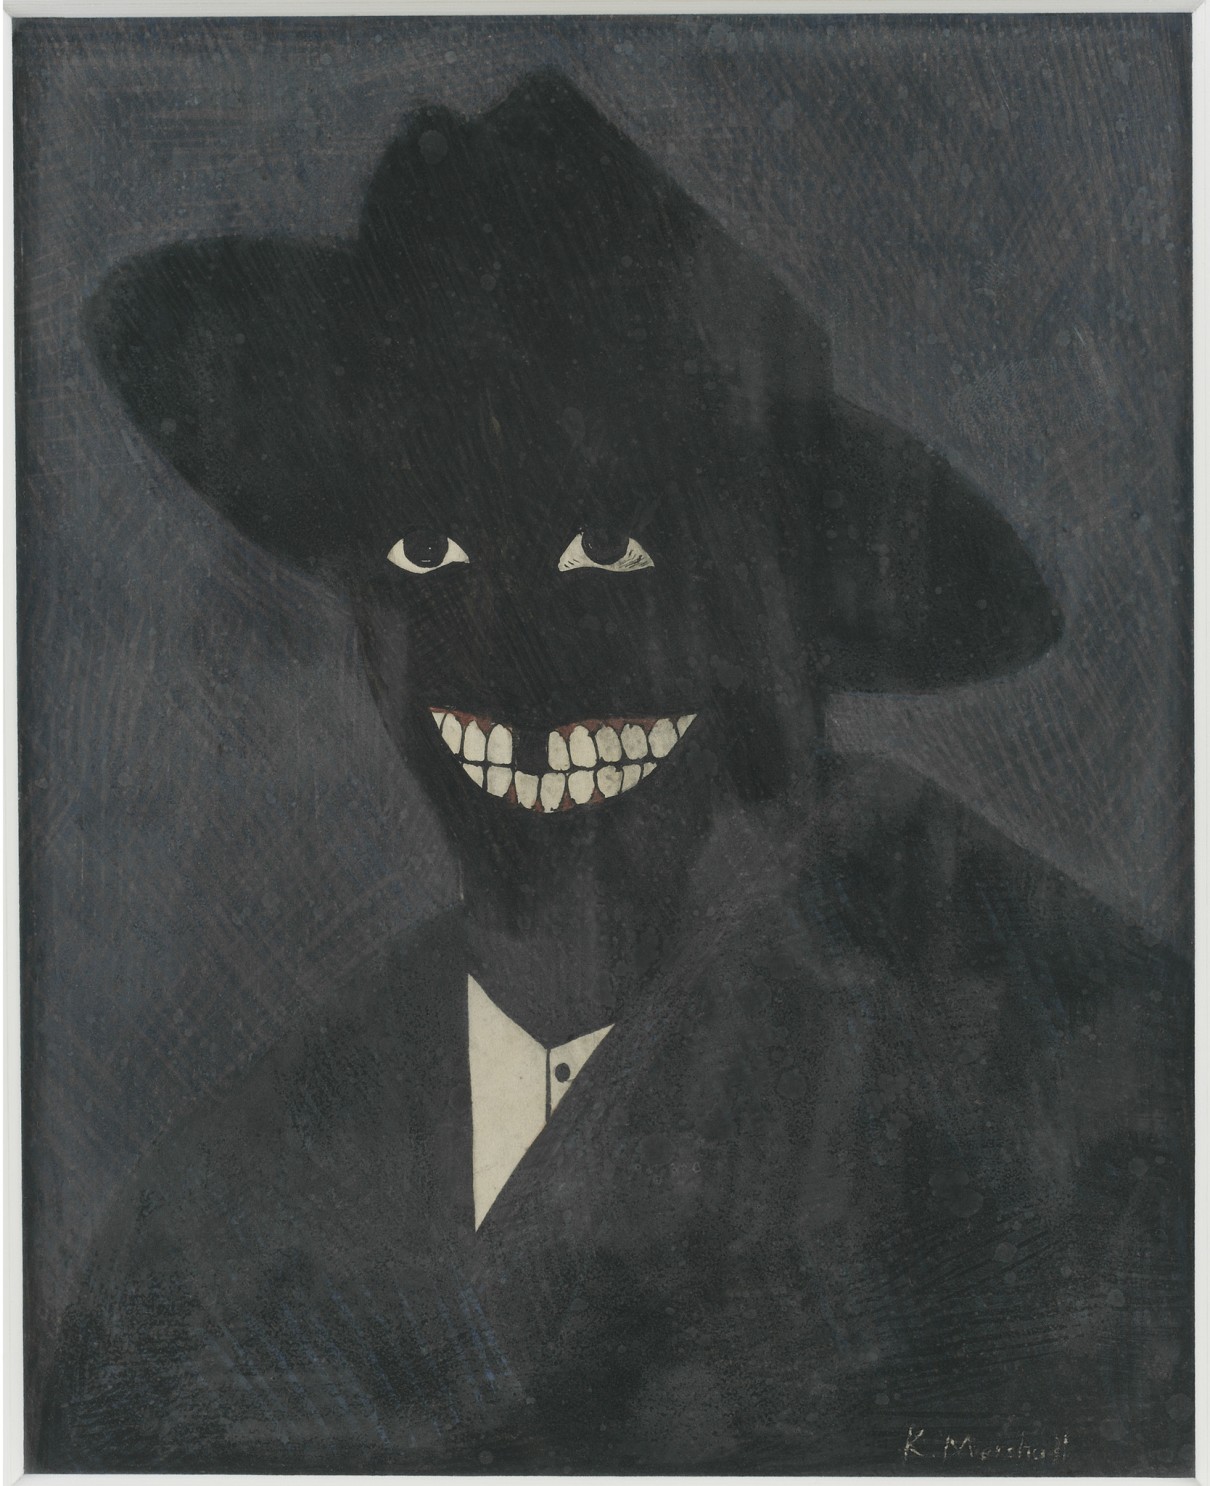 'A Portrait of the Artist as a Shadow of His Former Self' - Kerry James Marshall